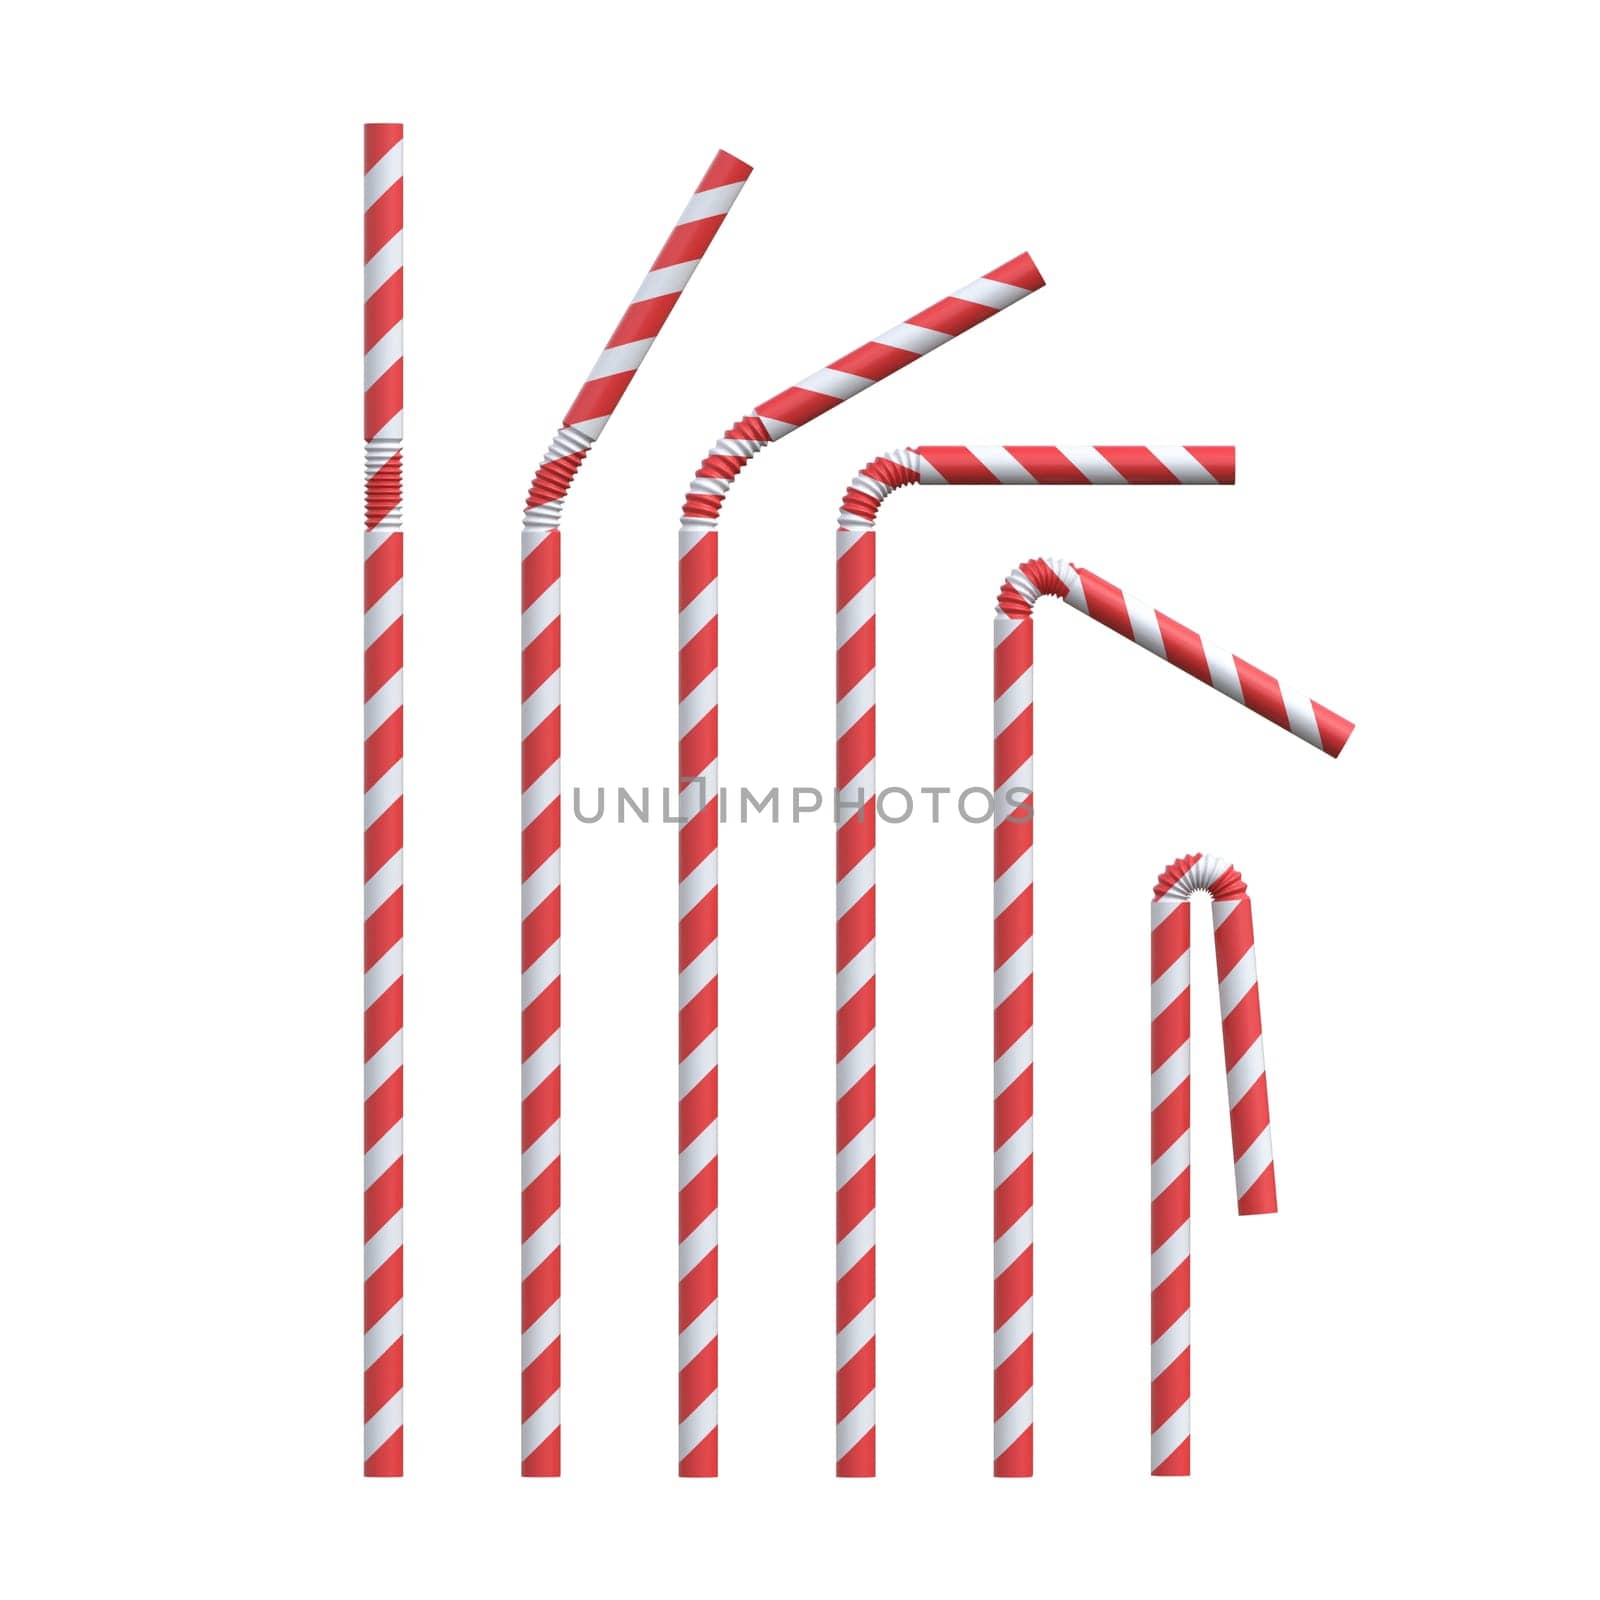 Set of red and white drinking straws spiral pattern 3D rendering illustration isolated on white background